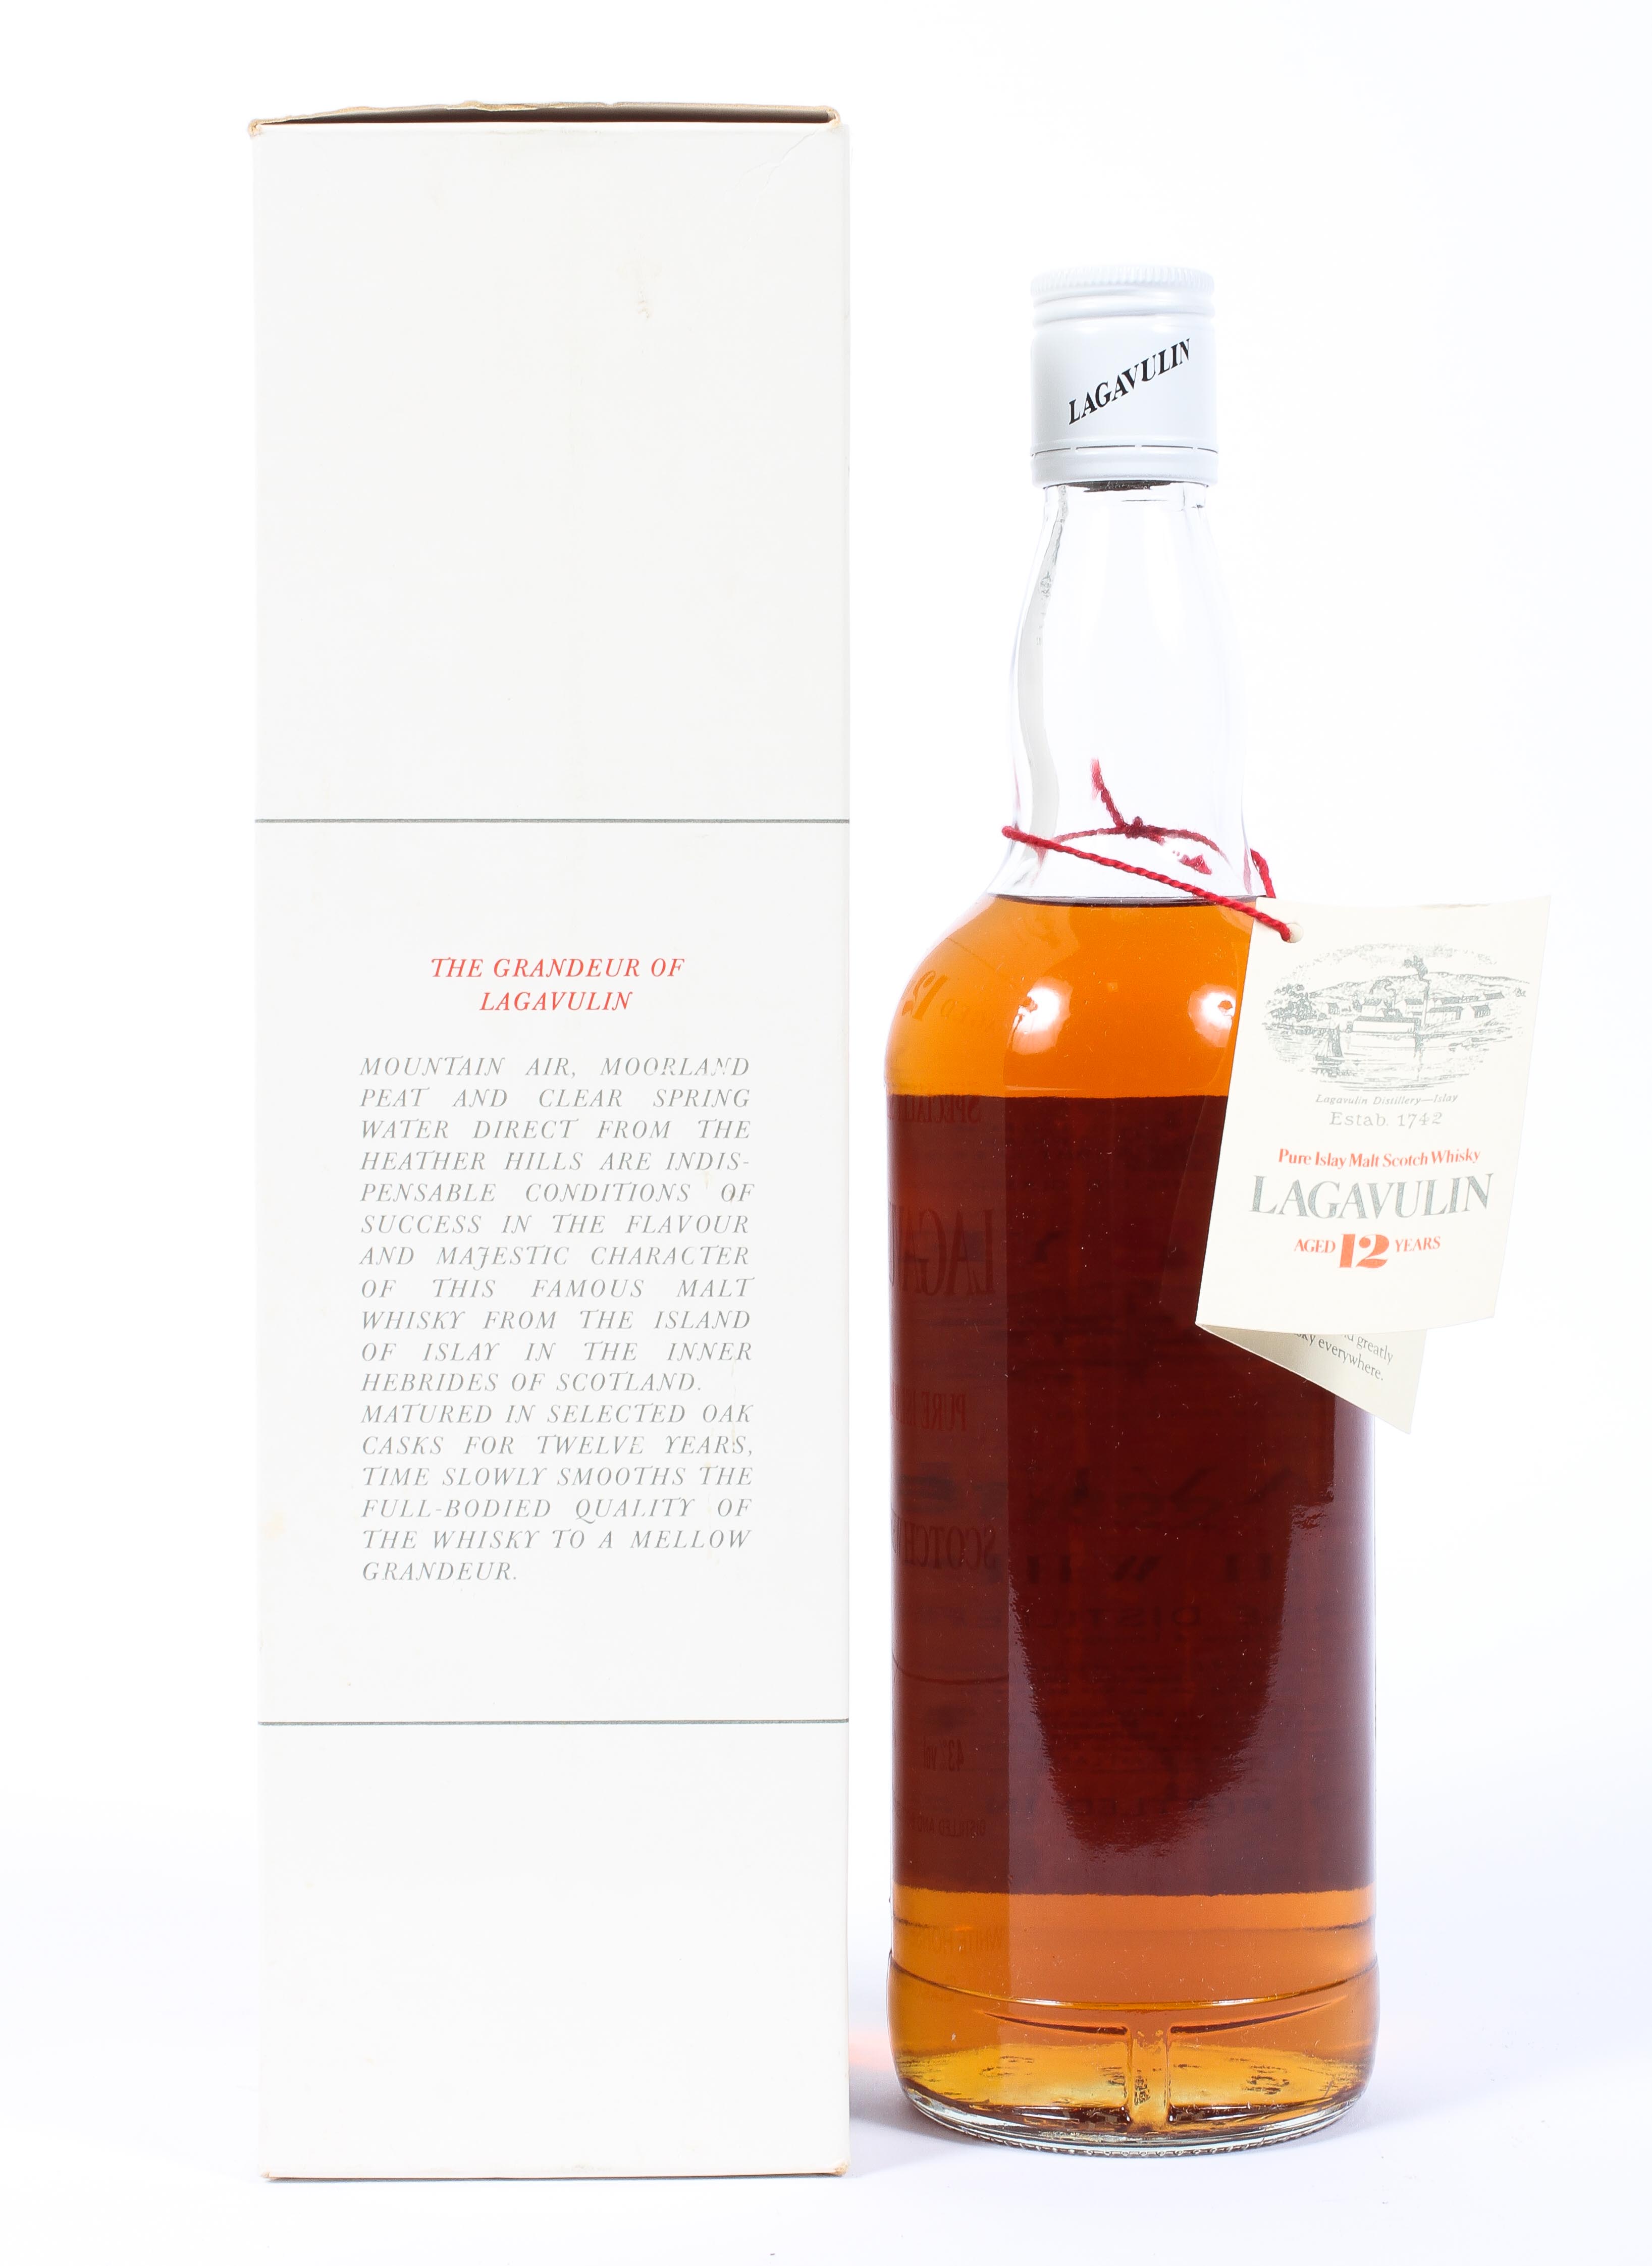 Whisky. Specially Selected Lagavulin Pure Islay Malt Scotch Whisky Aged 12 Years - Image 2 of 2